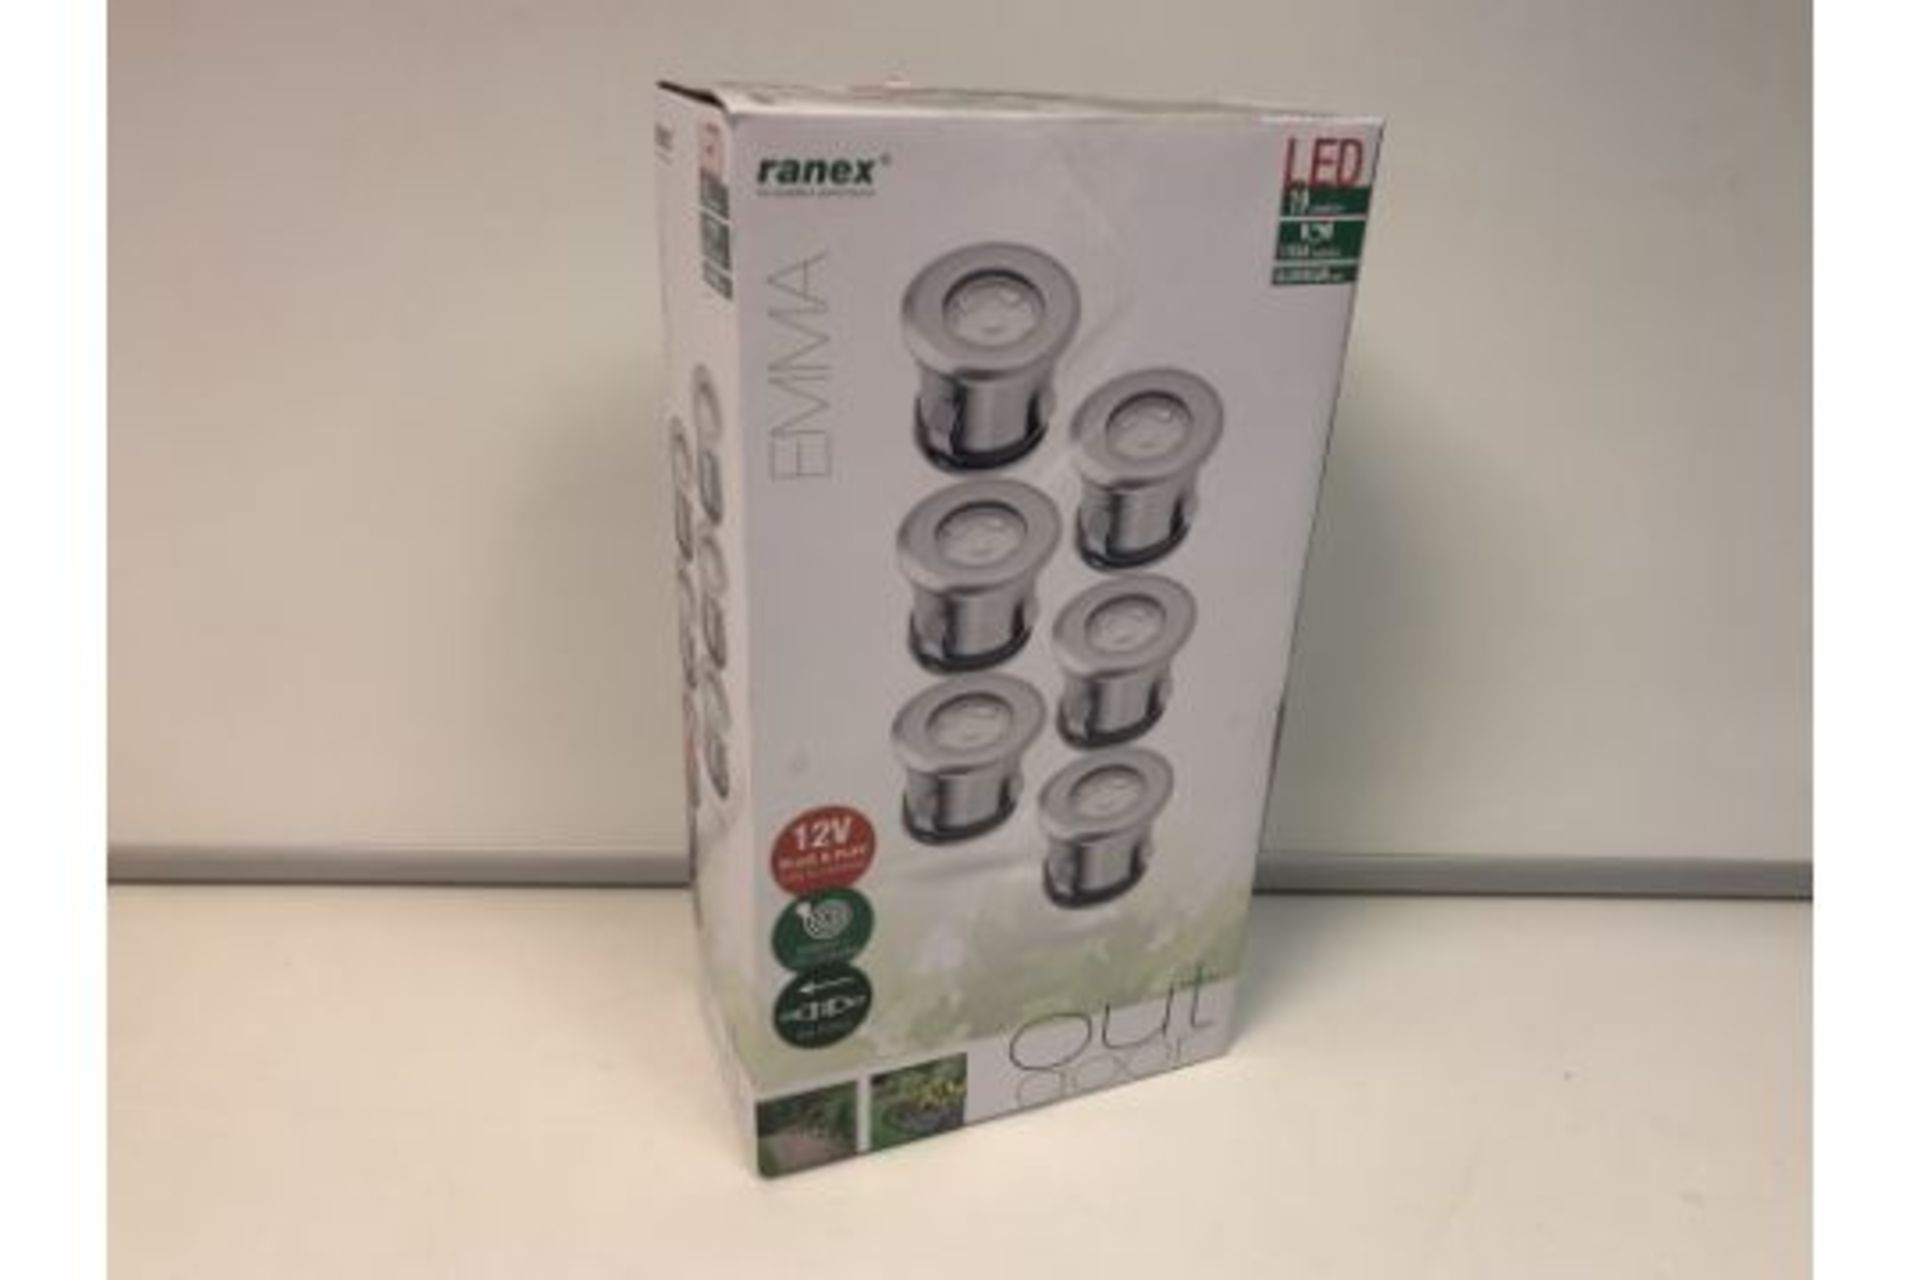 4 X NEW BOXED SETS OF 6 RANEX EMMA OUTDOOR UPLIGHTS. 12V PLUG & PLAY, EASY TO CONNECT, ADAPTOR + 12M